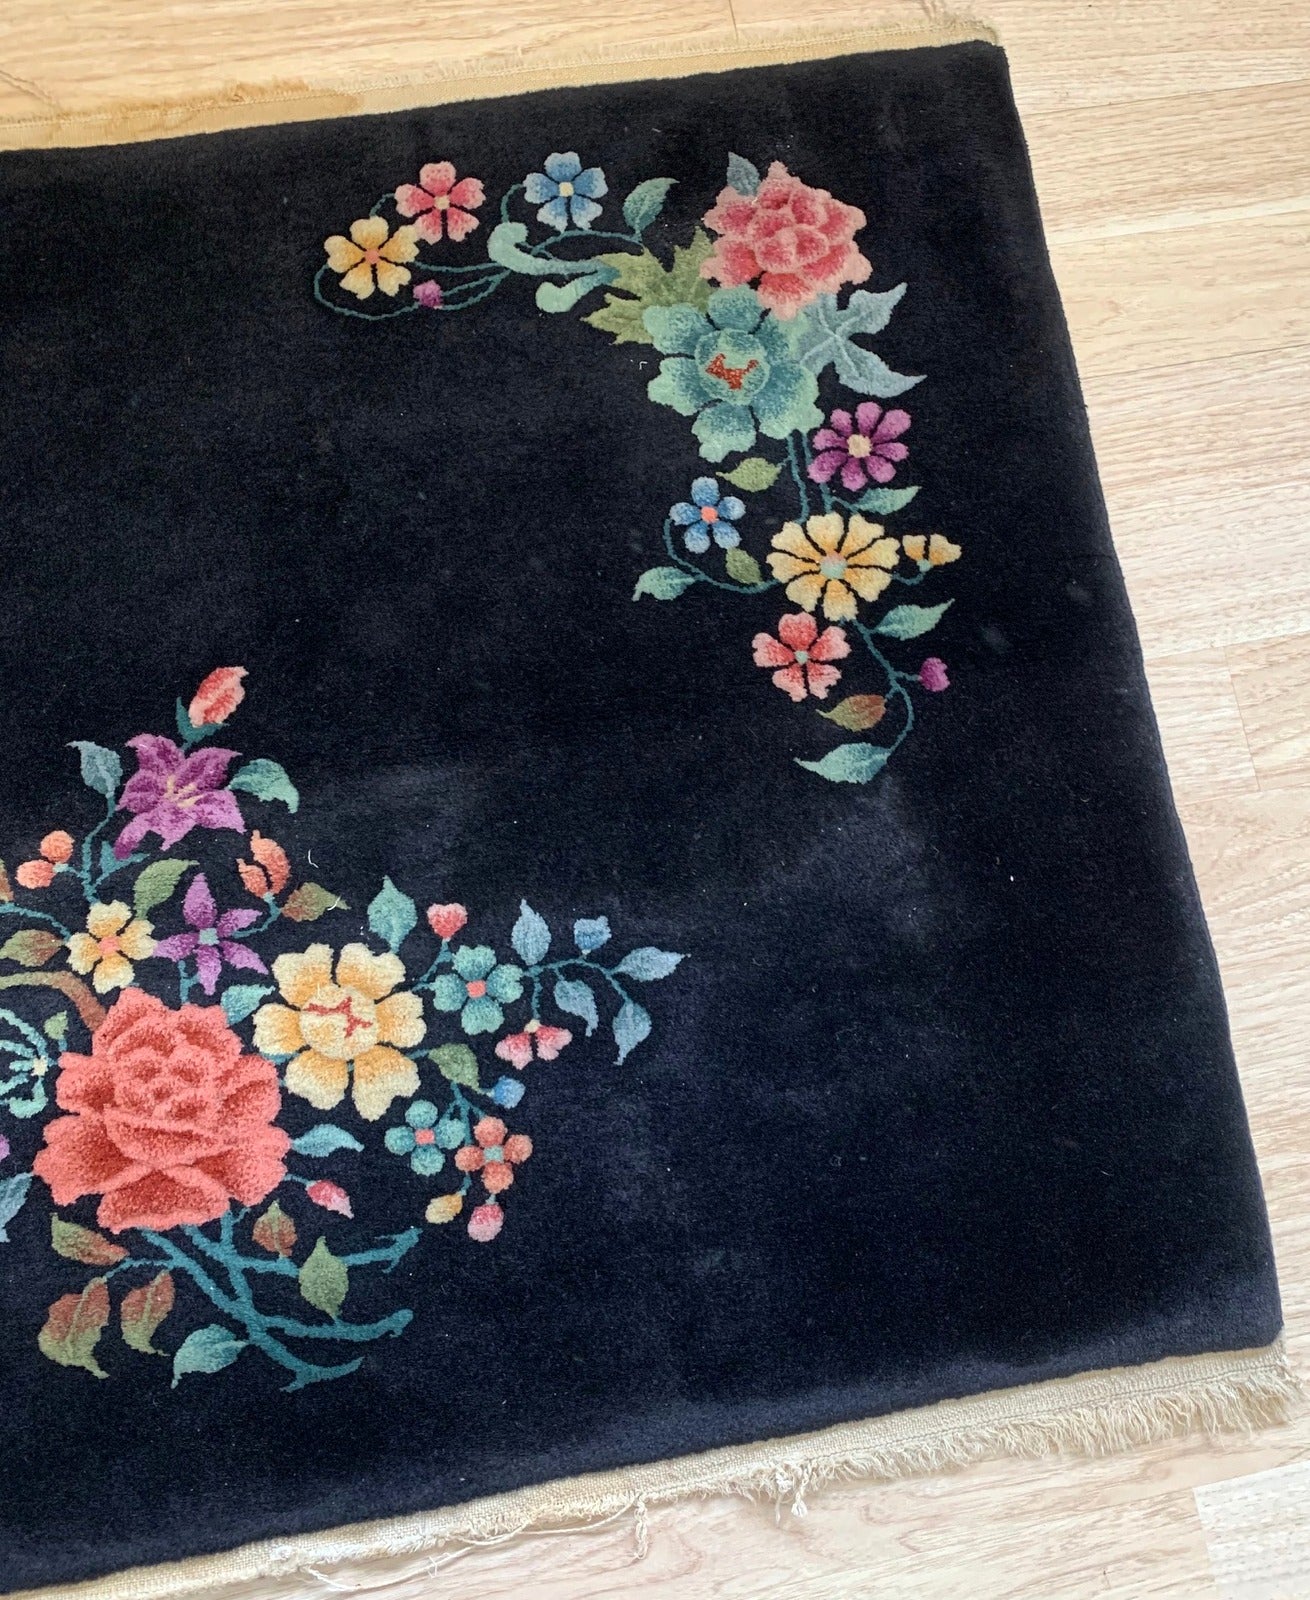 Handmade antique Art Deco Chinese rug in black color with minimal floral design. The rug is from the beginning of 20th century in original good condition.